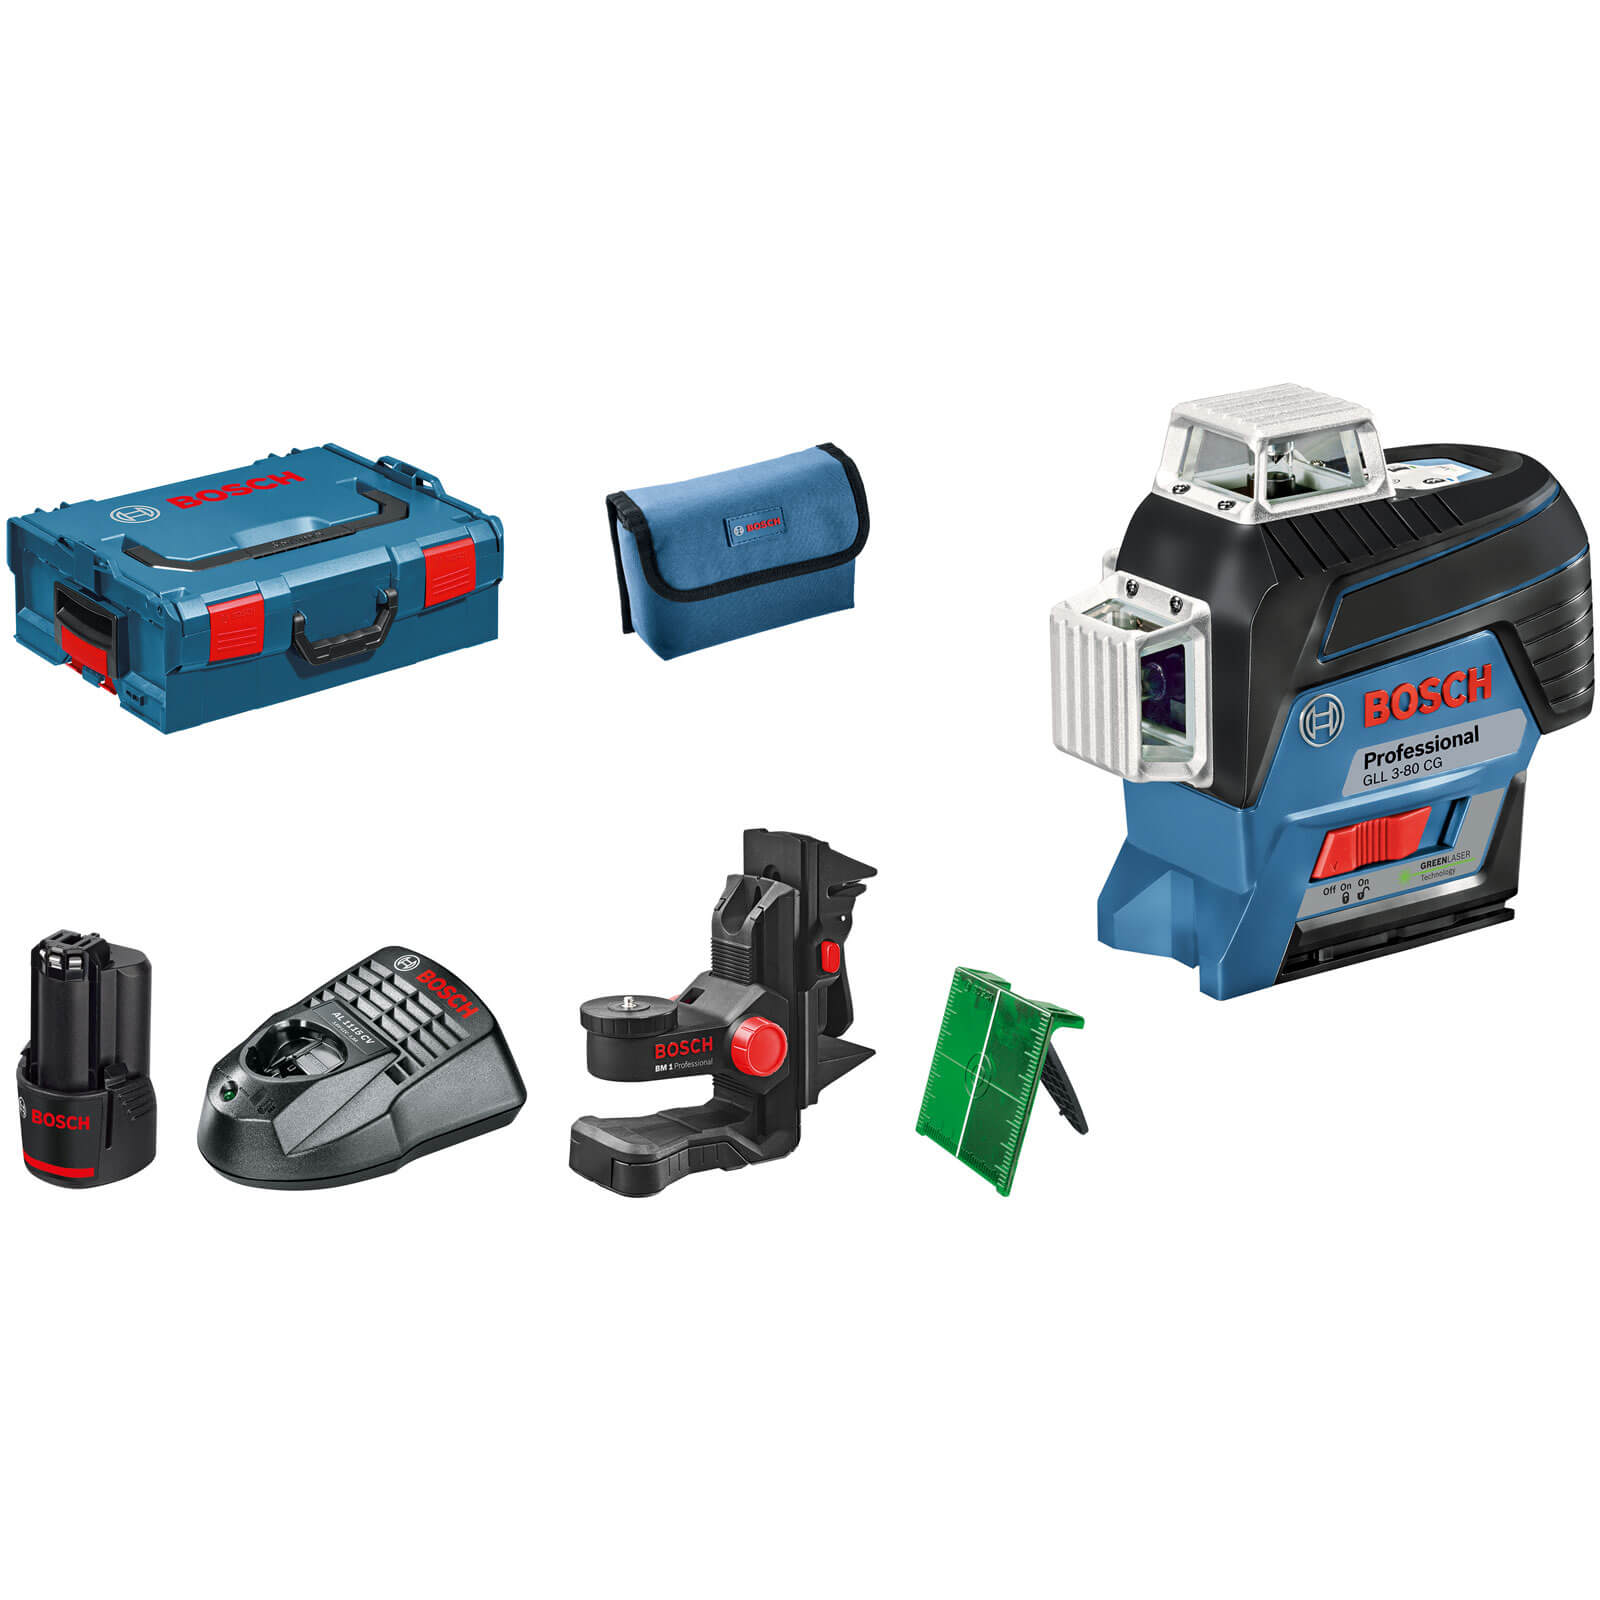 Image of Bosch GLL 3-80 CG 12v Cordless Connected Green Line Laser Level 1 x 2ah Li-ion Charger Case